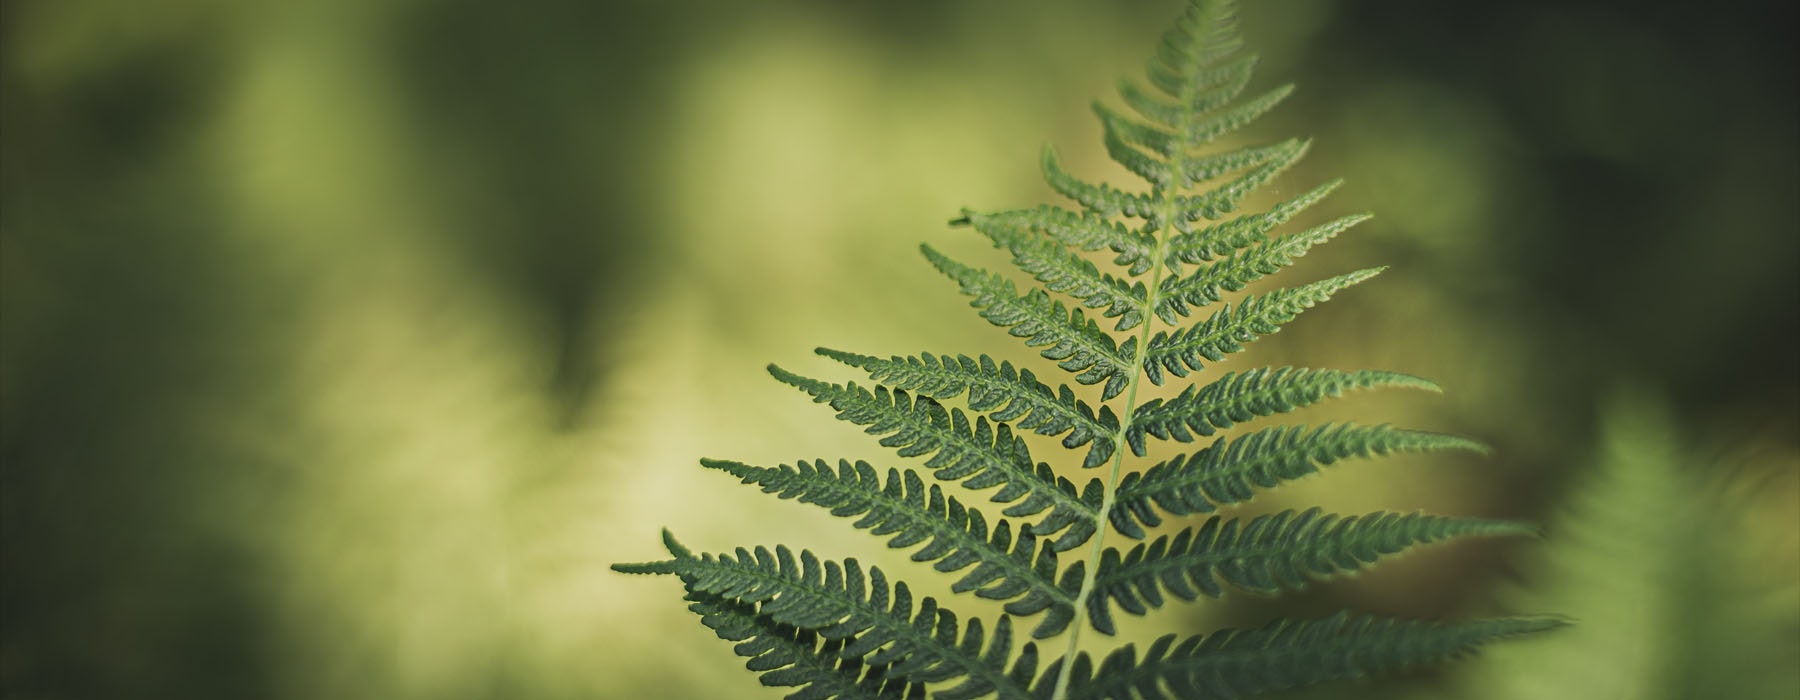 Photo of a green fern in focus with out-of-focus bush behind